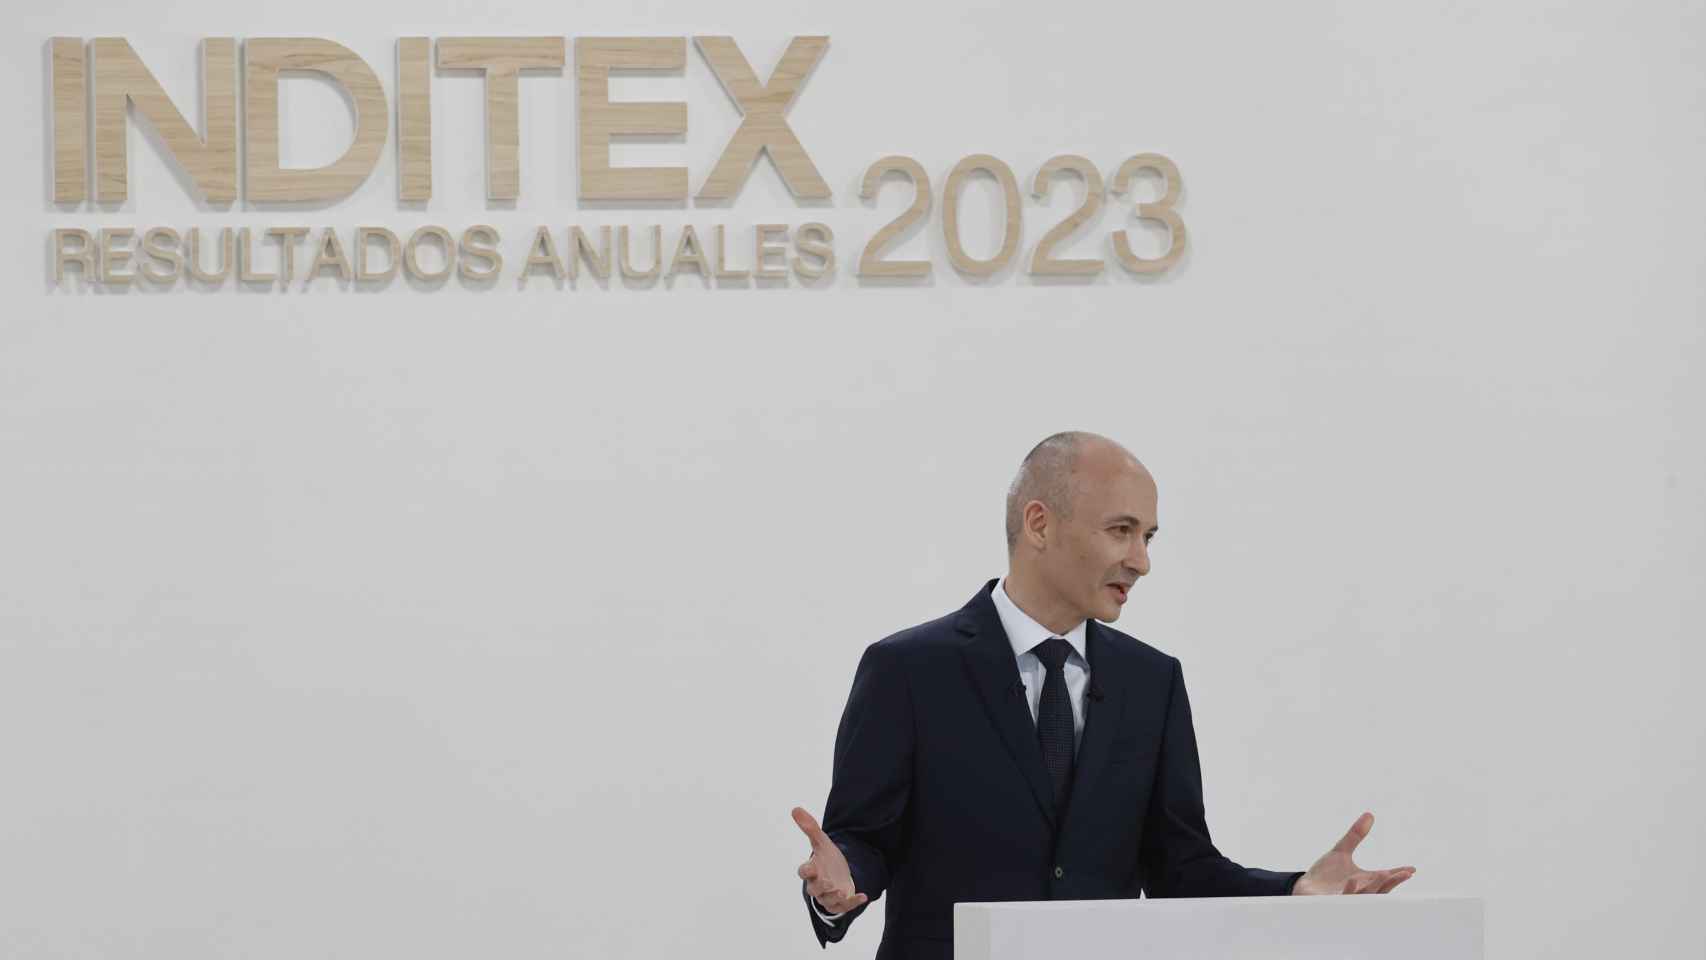 Inditex is committed to aggressive investment in logistics as its online business grows larger than its physical business